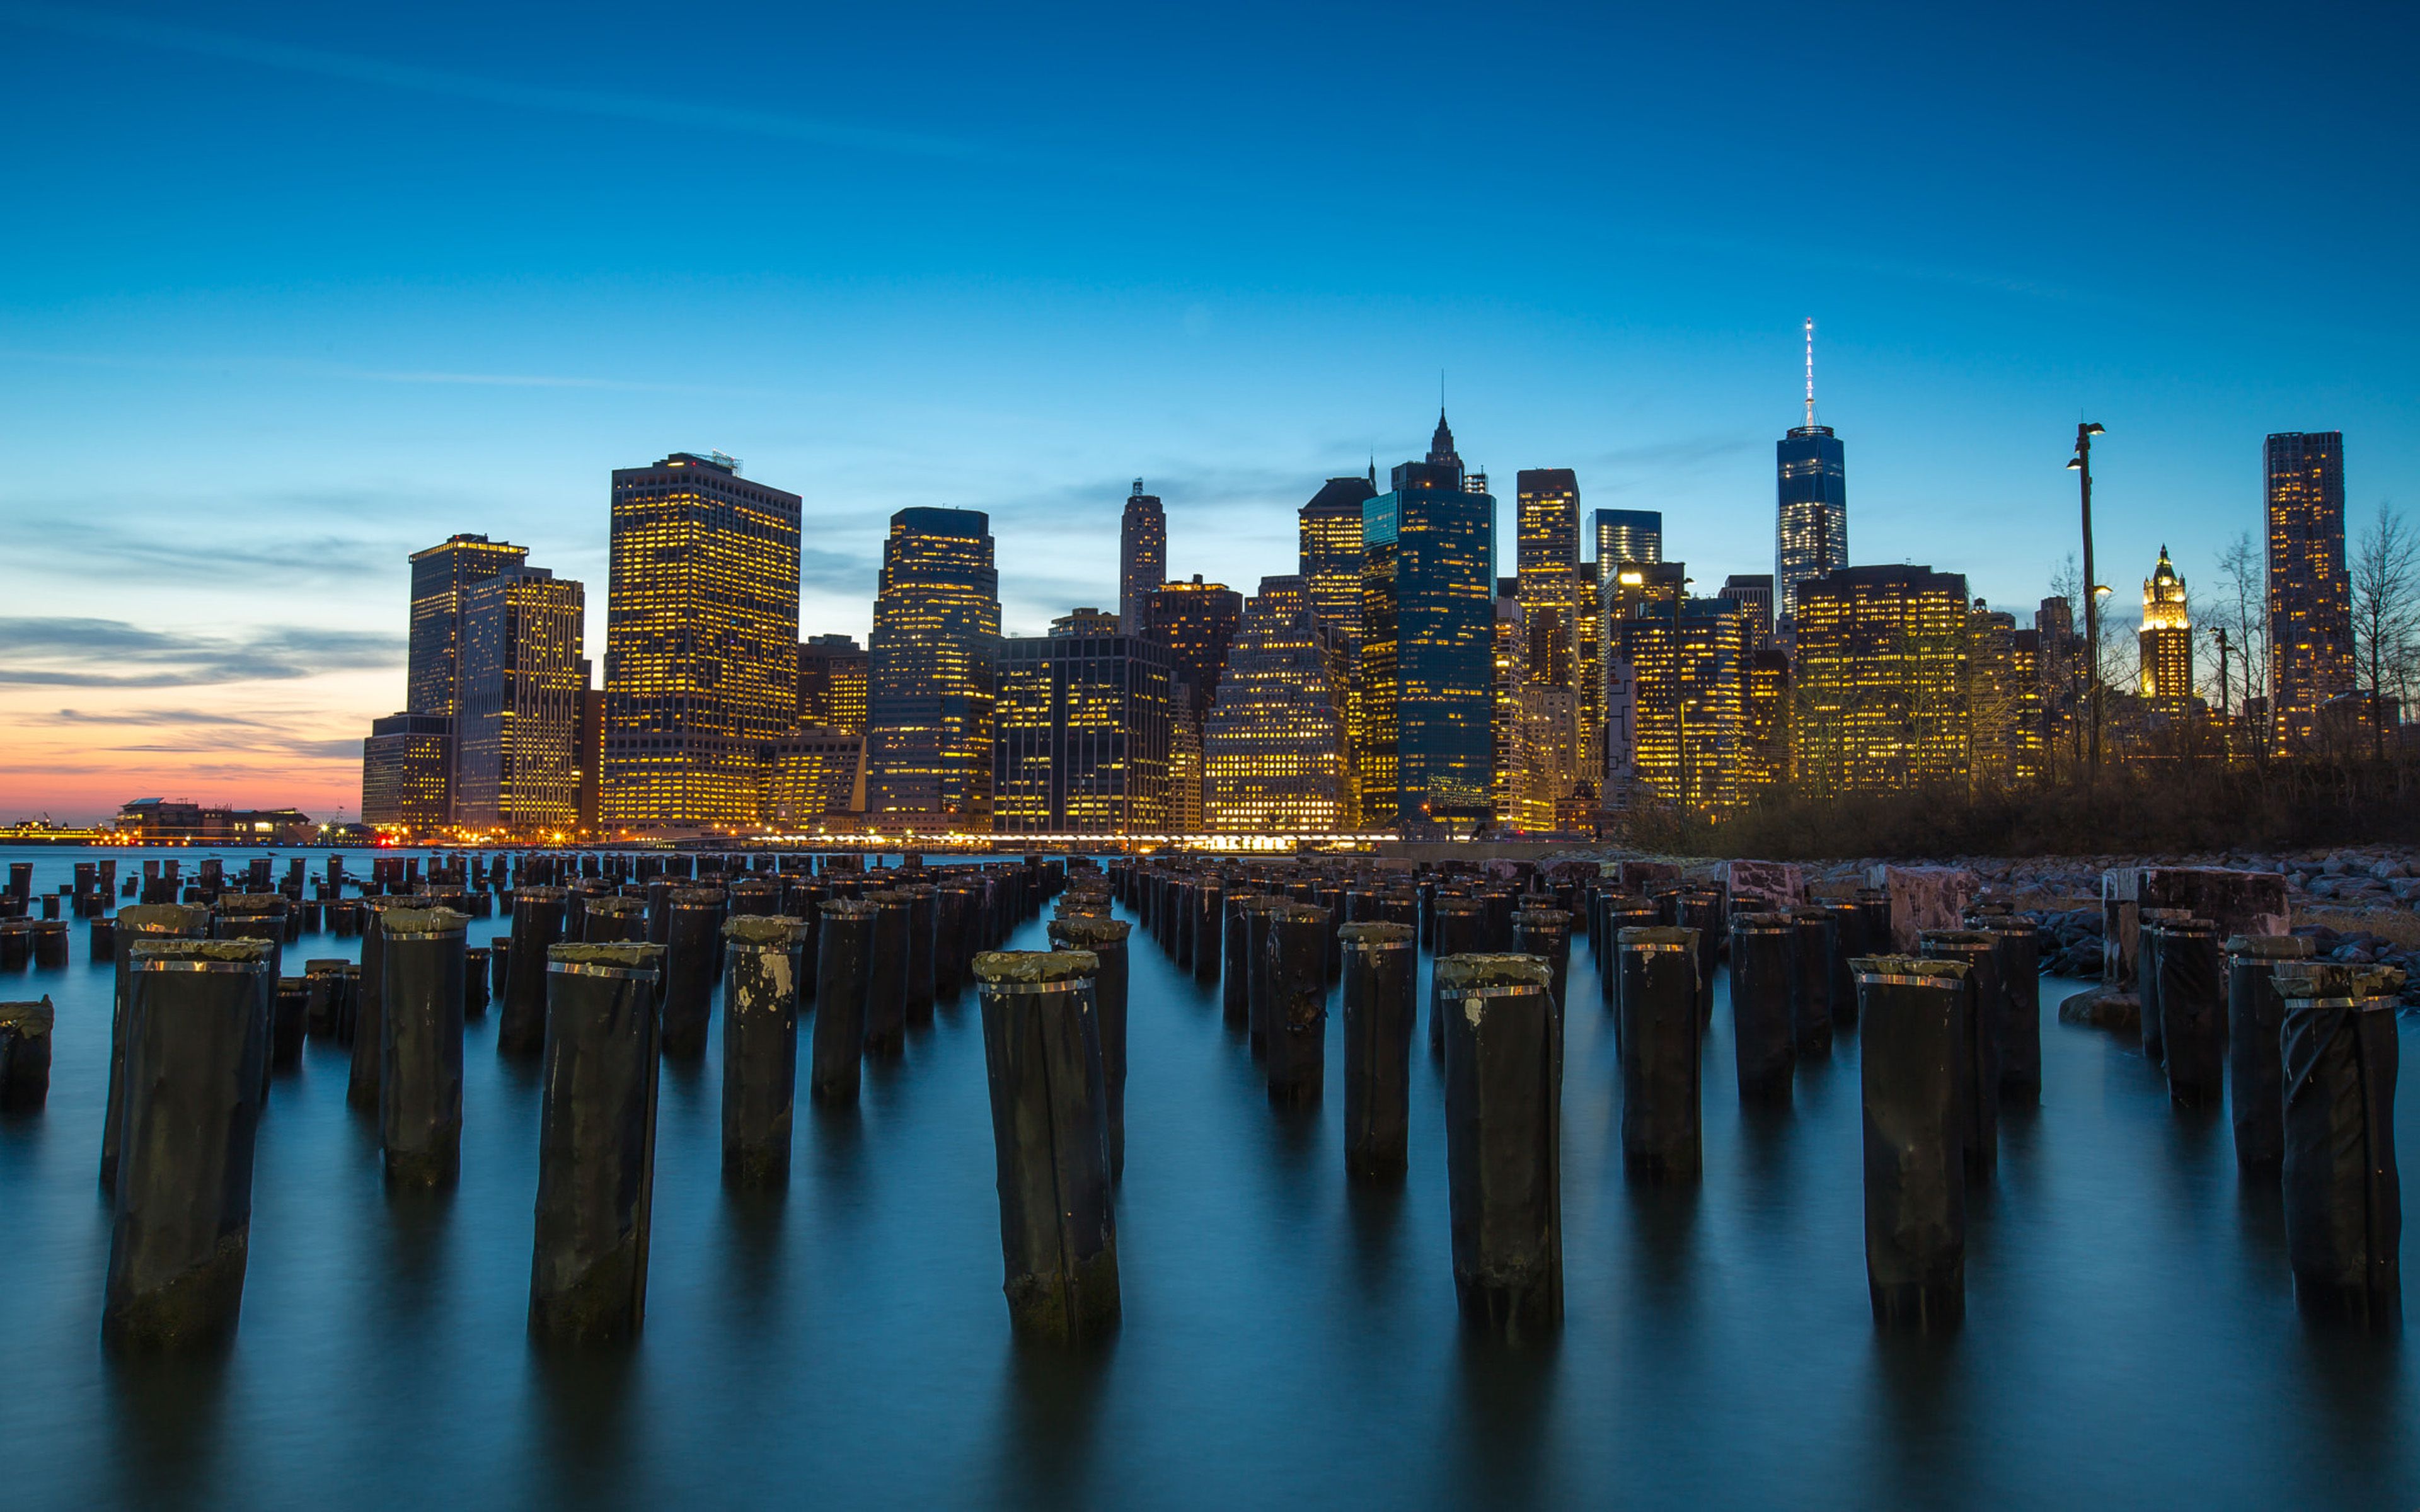 The Port Manhattan New York City Sunset Dusk Landscape 4k Ultra Hd Desktop Wallpapers For Computers Laptop Tablet And Mobile Phones 3840x2400 : Wallpapers13